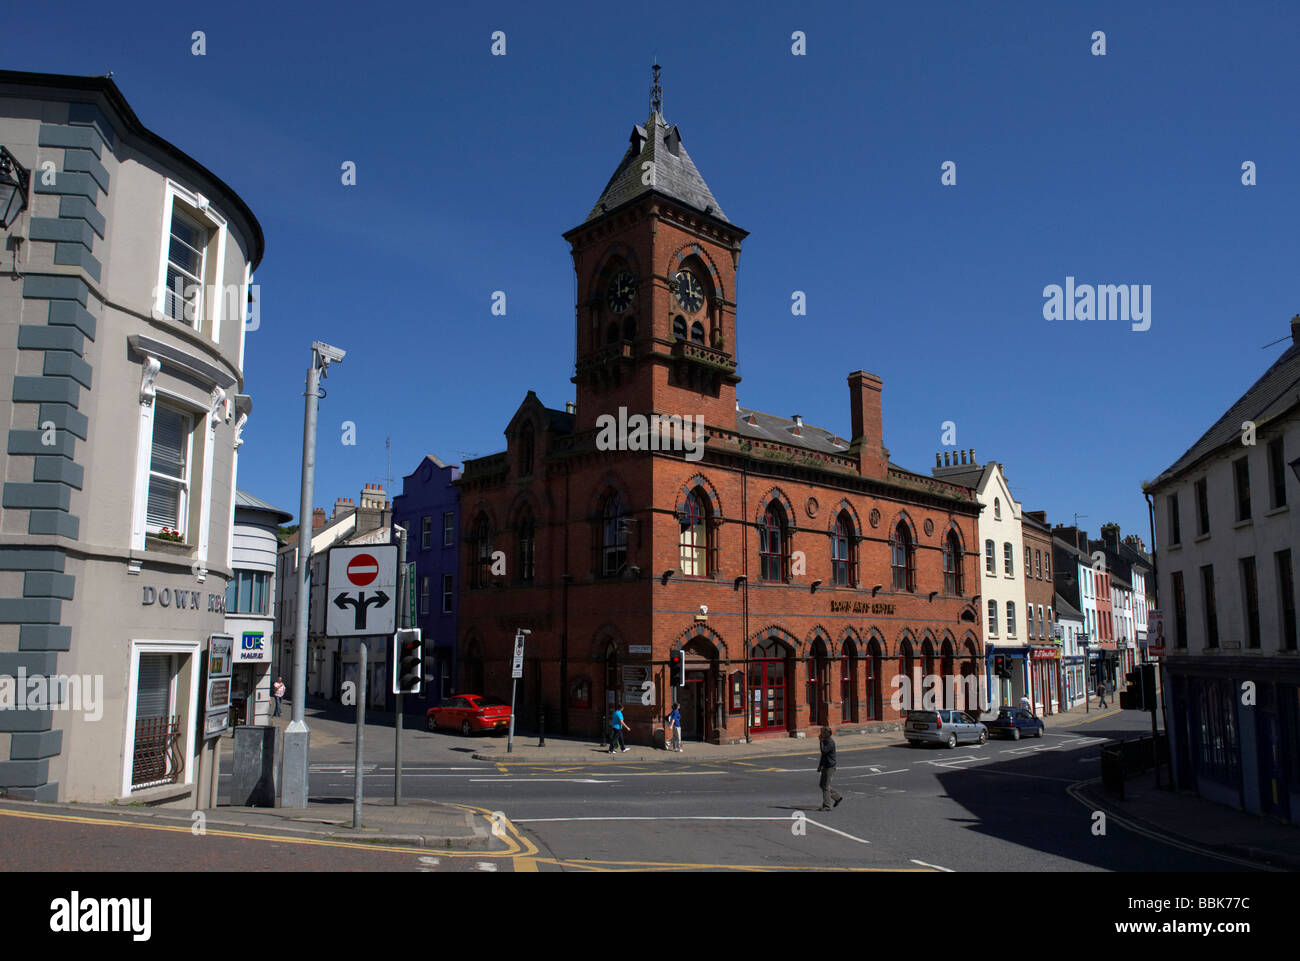 the down arts centre in the old town hall in the town centre of downpatrick with english street junction with irish street Stock Photo